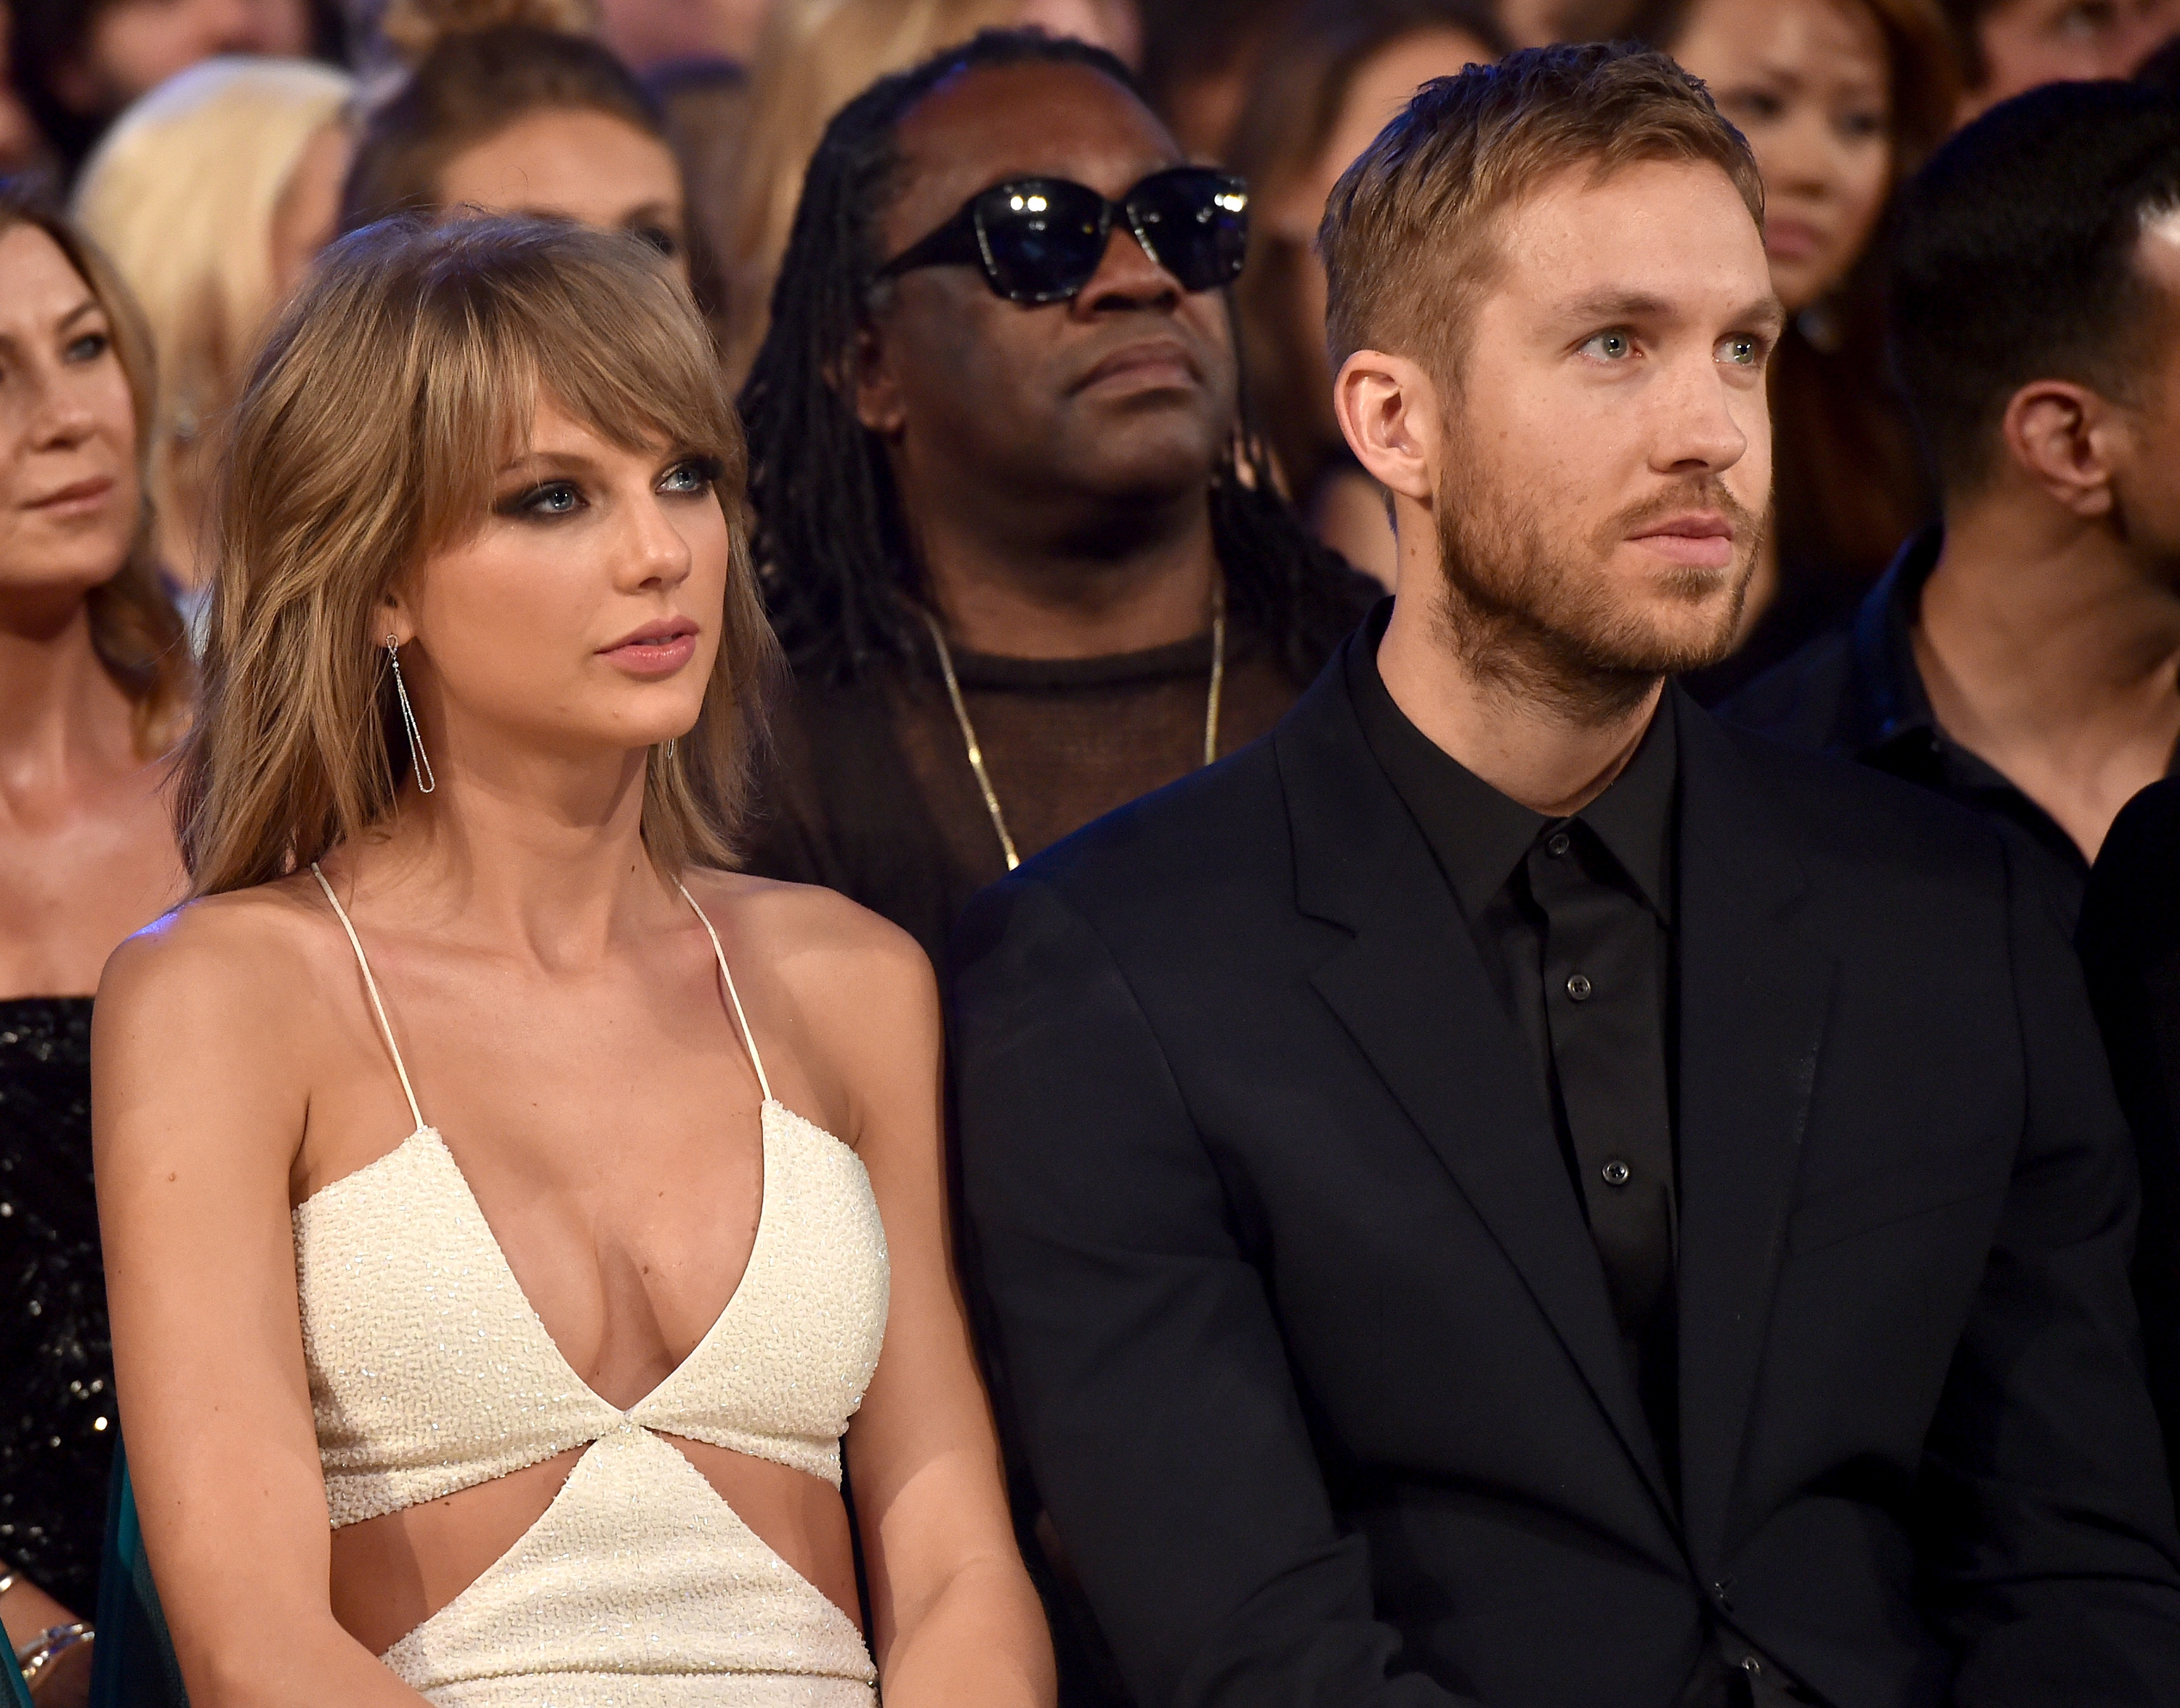 Taylor Swift and Calvin Harris attend the 2015 Billboard Music Awards on May 17, 2015